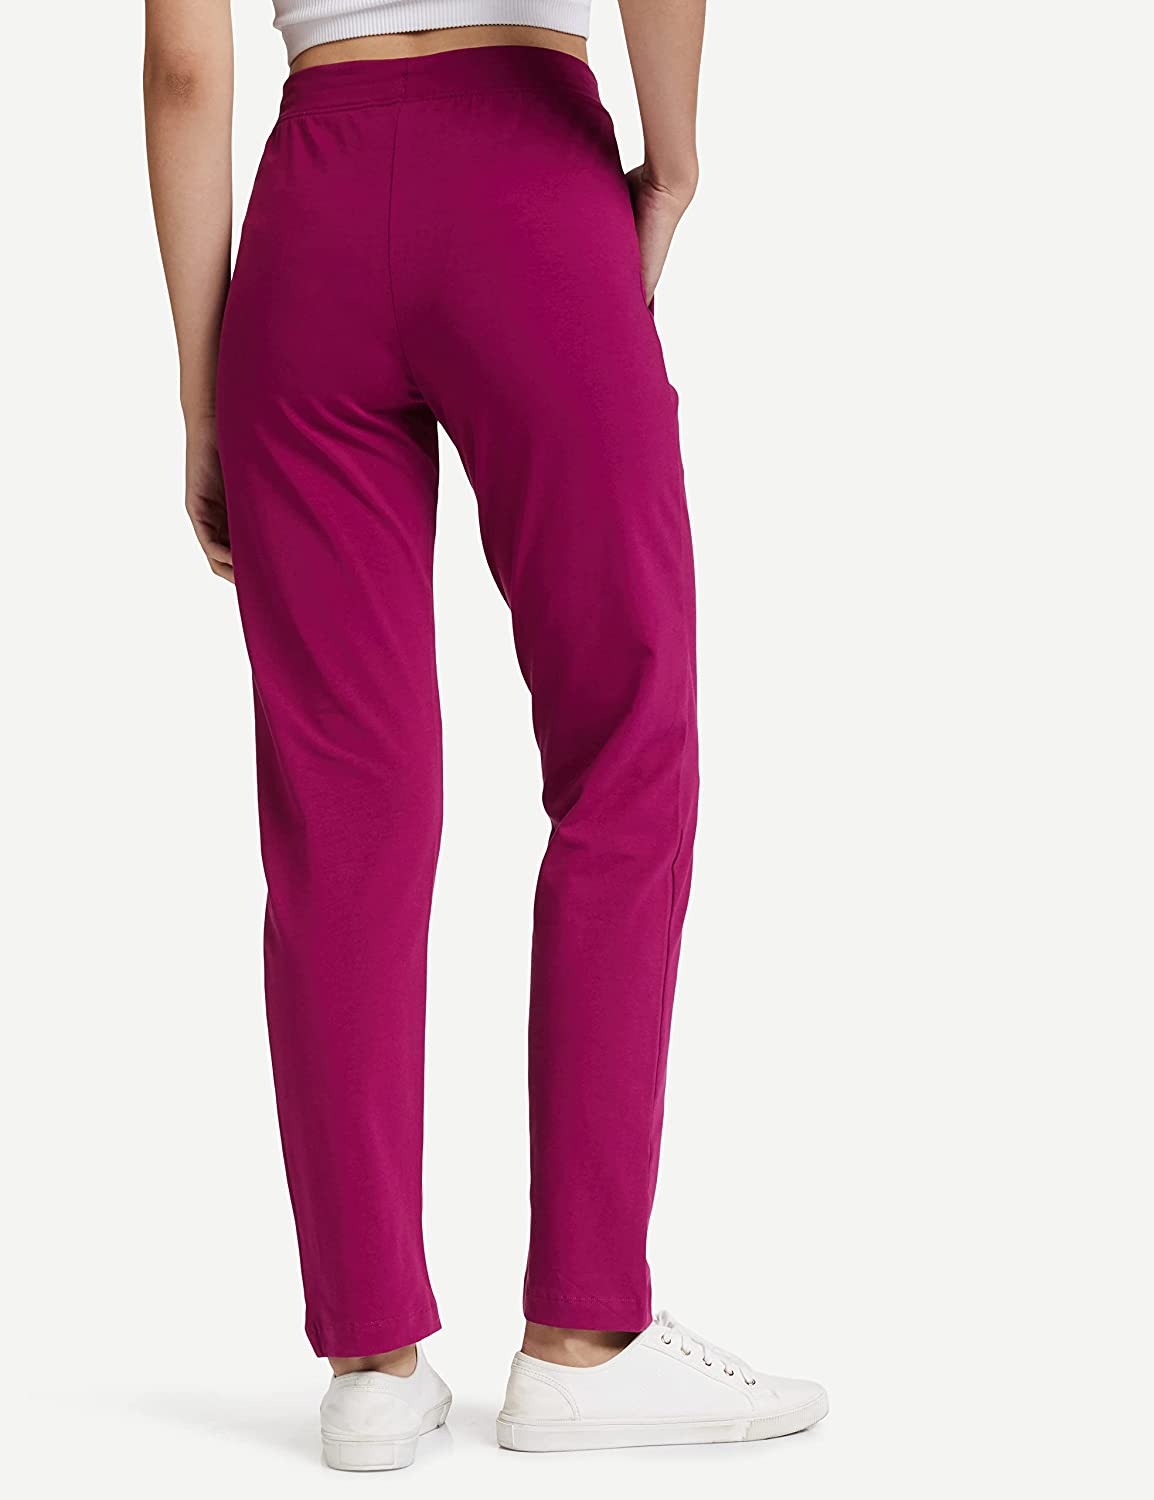 Van Heusen Women Solid Athleisure Lounge Pants with Pockets